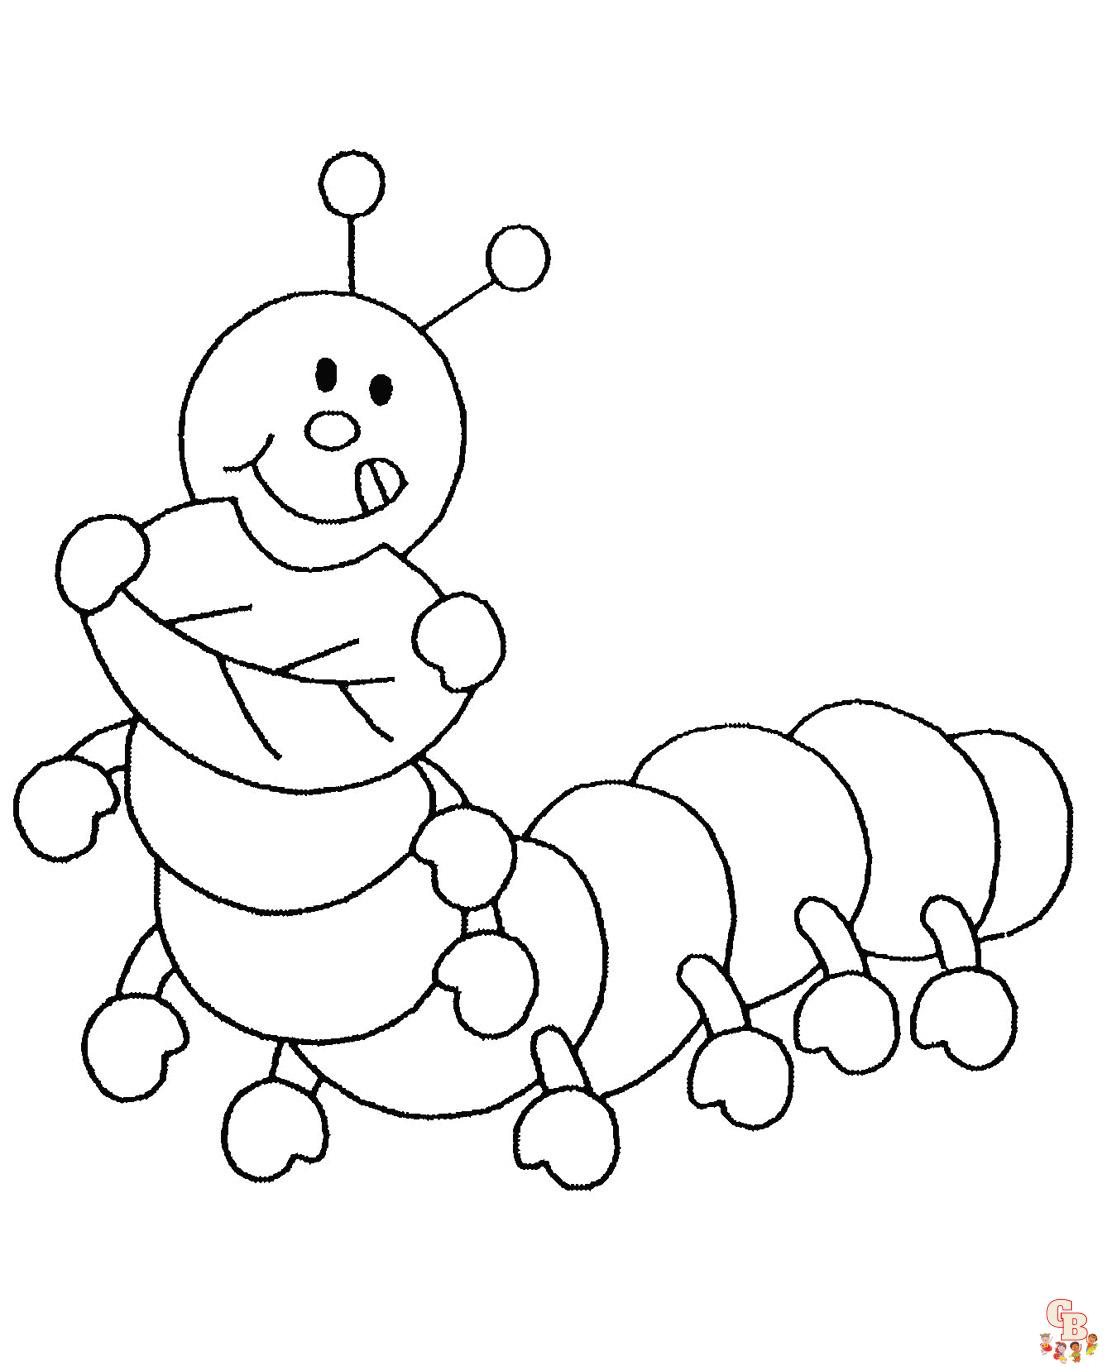 Caterpillar Coloring Pages 8